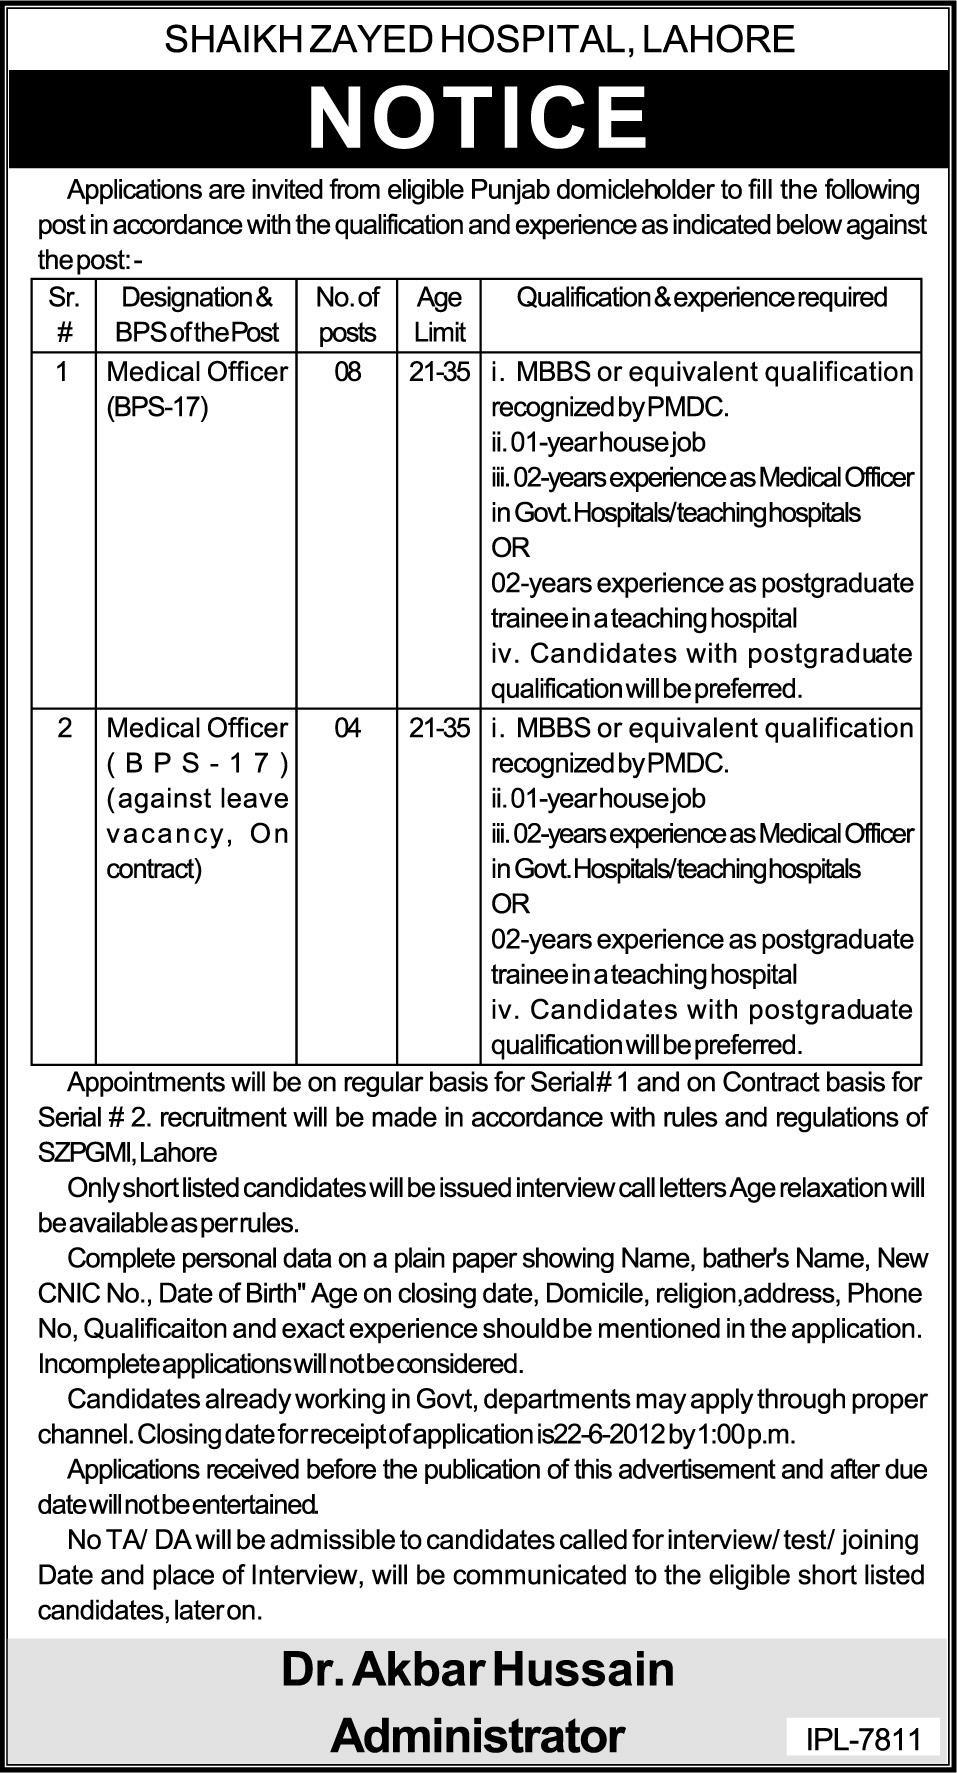 Medical Officers Required at Shaikh Zyed Hospital